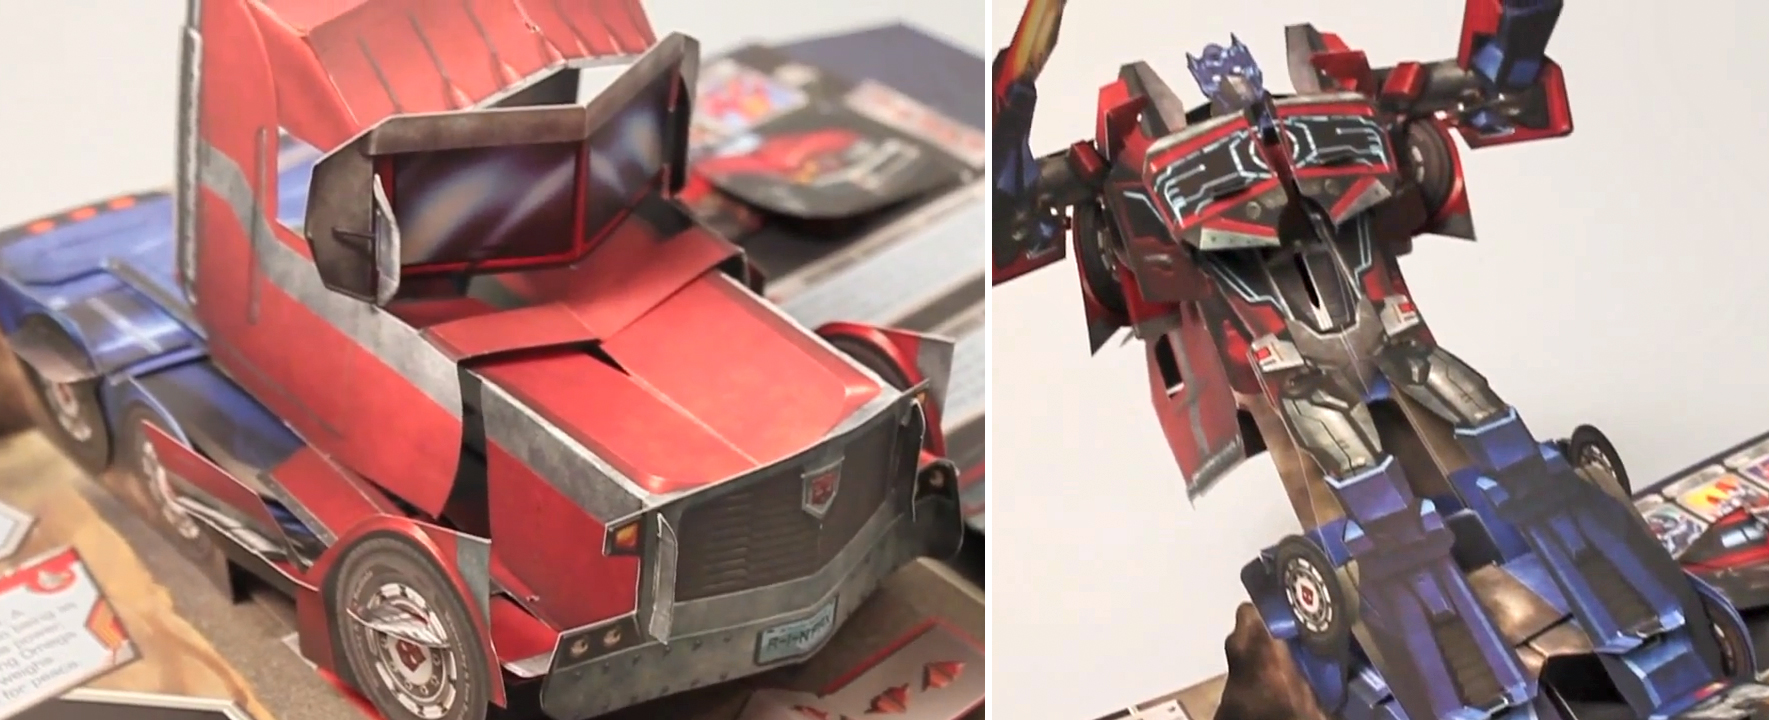 Transformers Pop-Up Book Features Paper Robots That Actually Transform